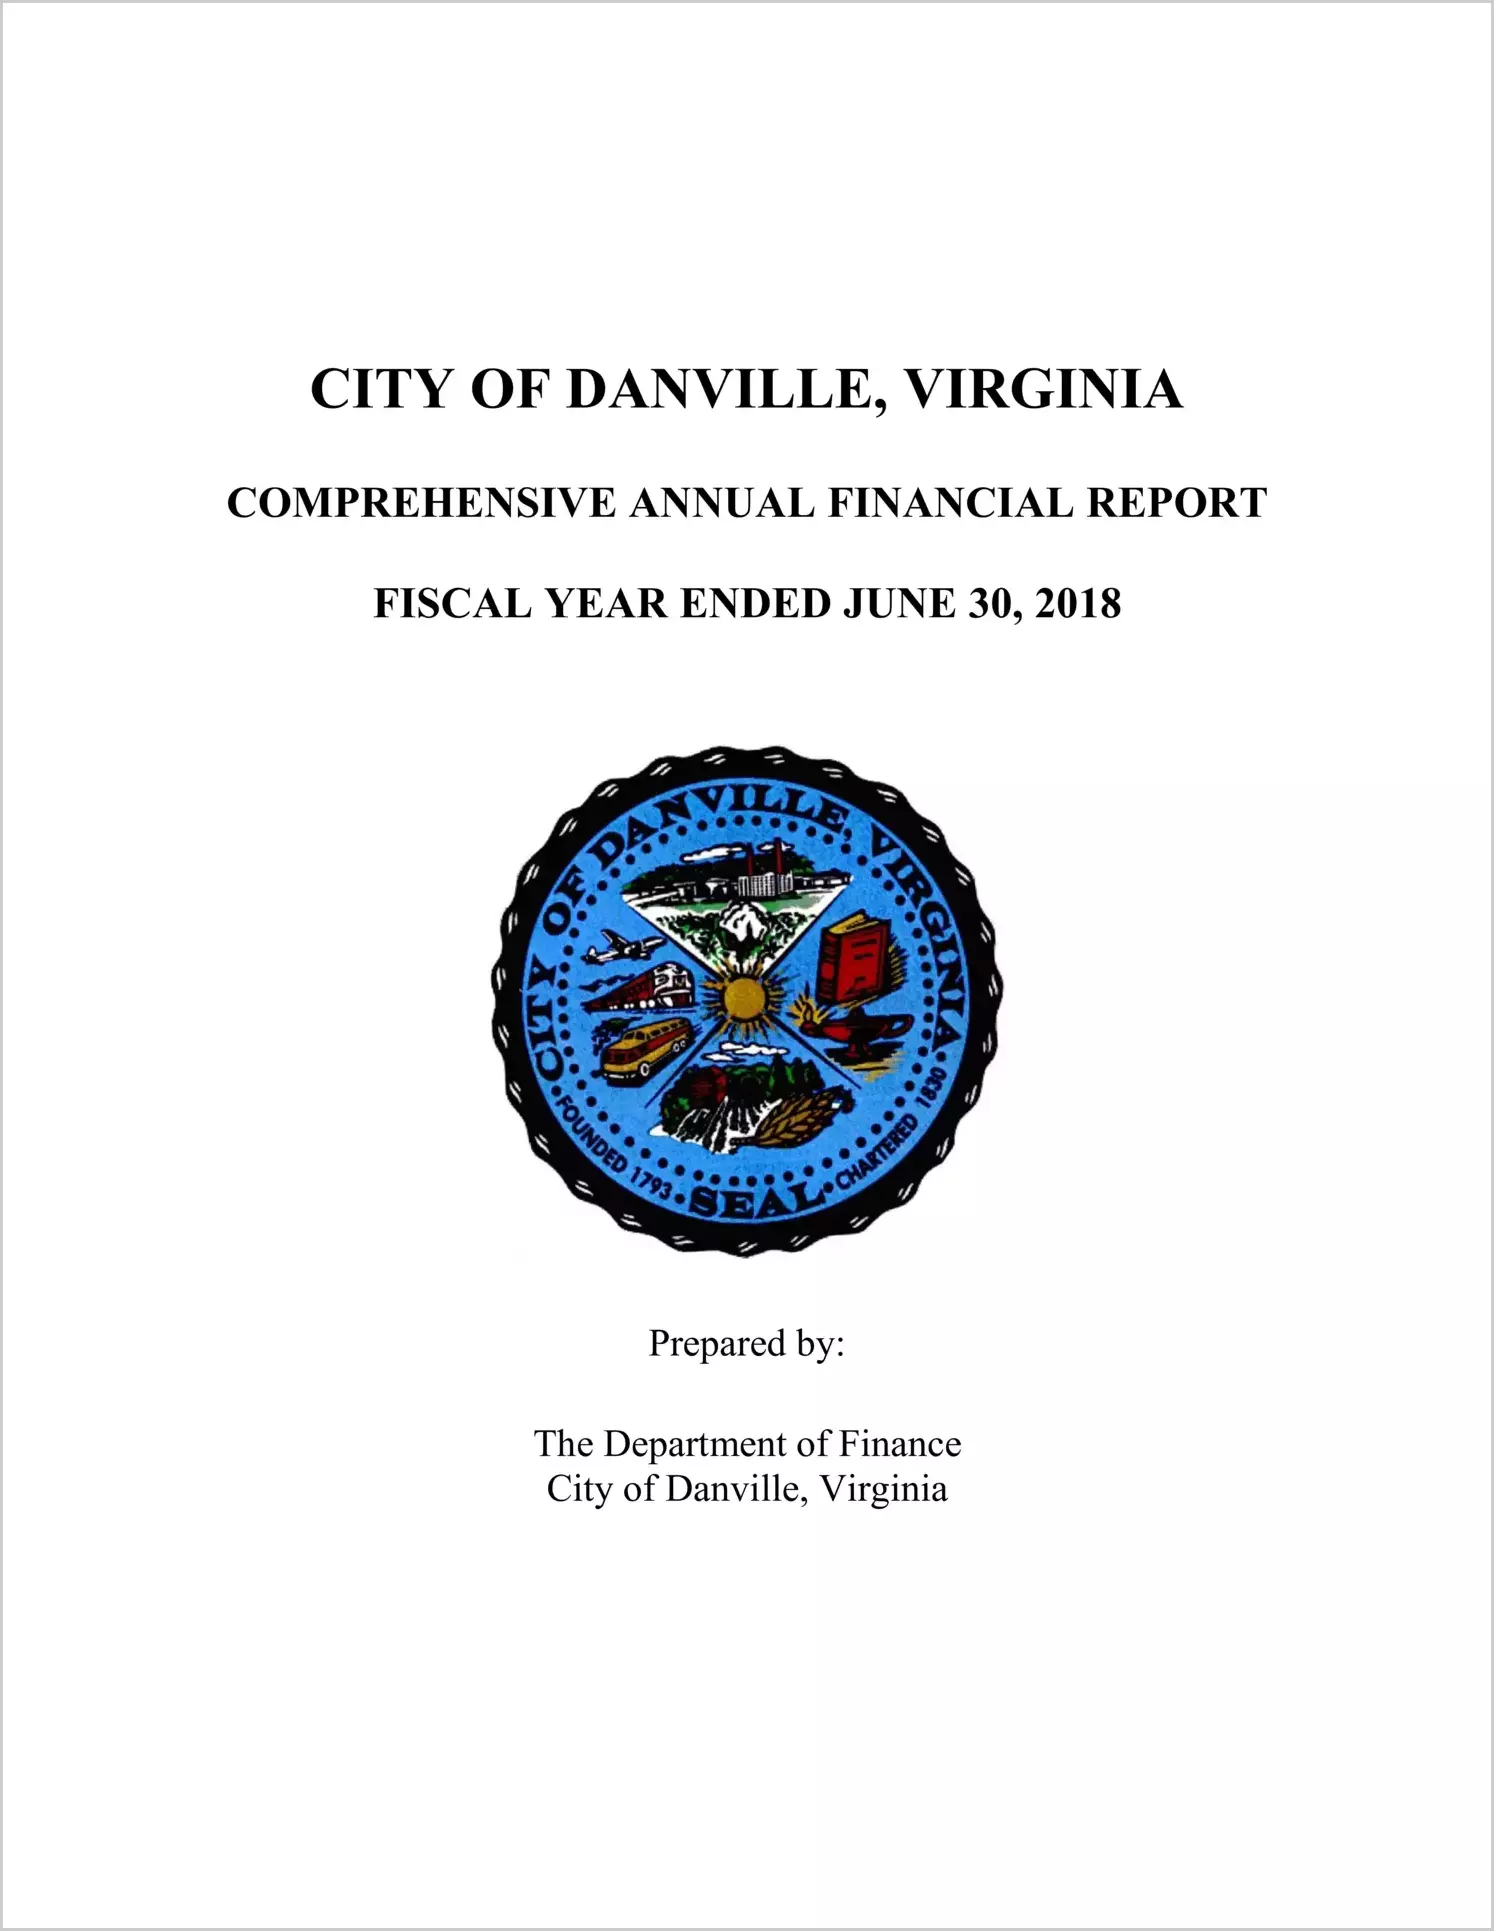 2018 Annual Financial Report for City of Danville